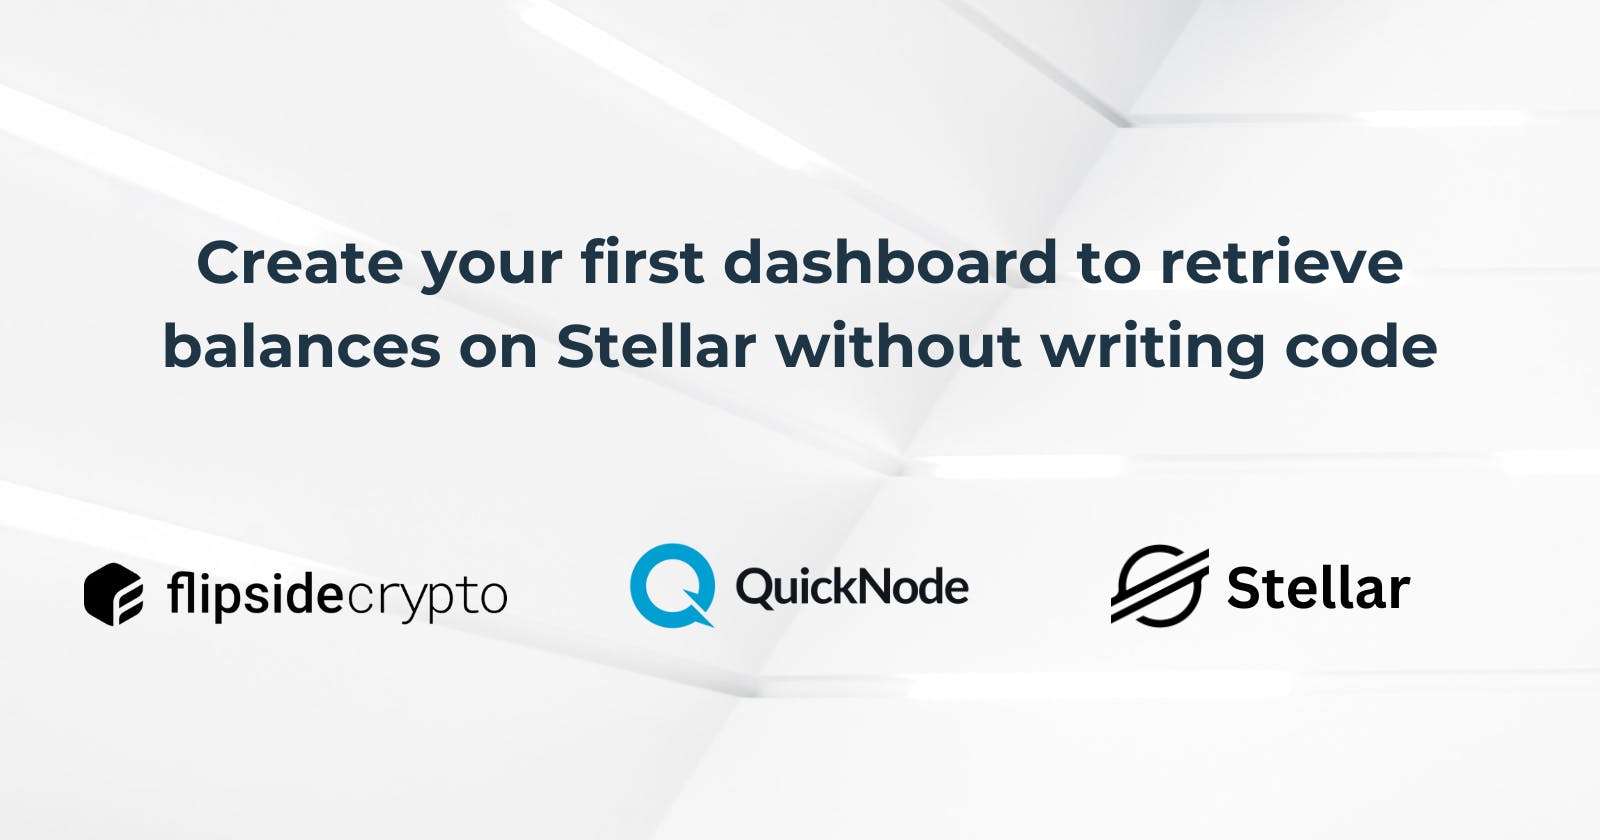 Create your first dashboard to retrieve balances on Stellar without writing code